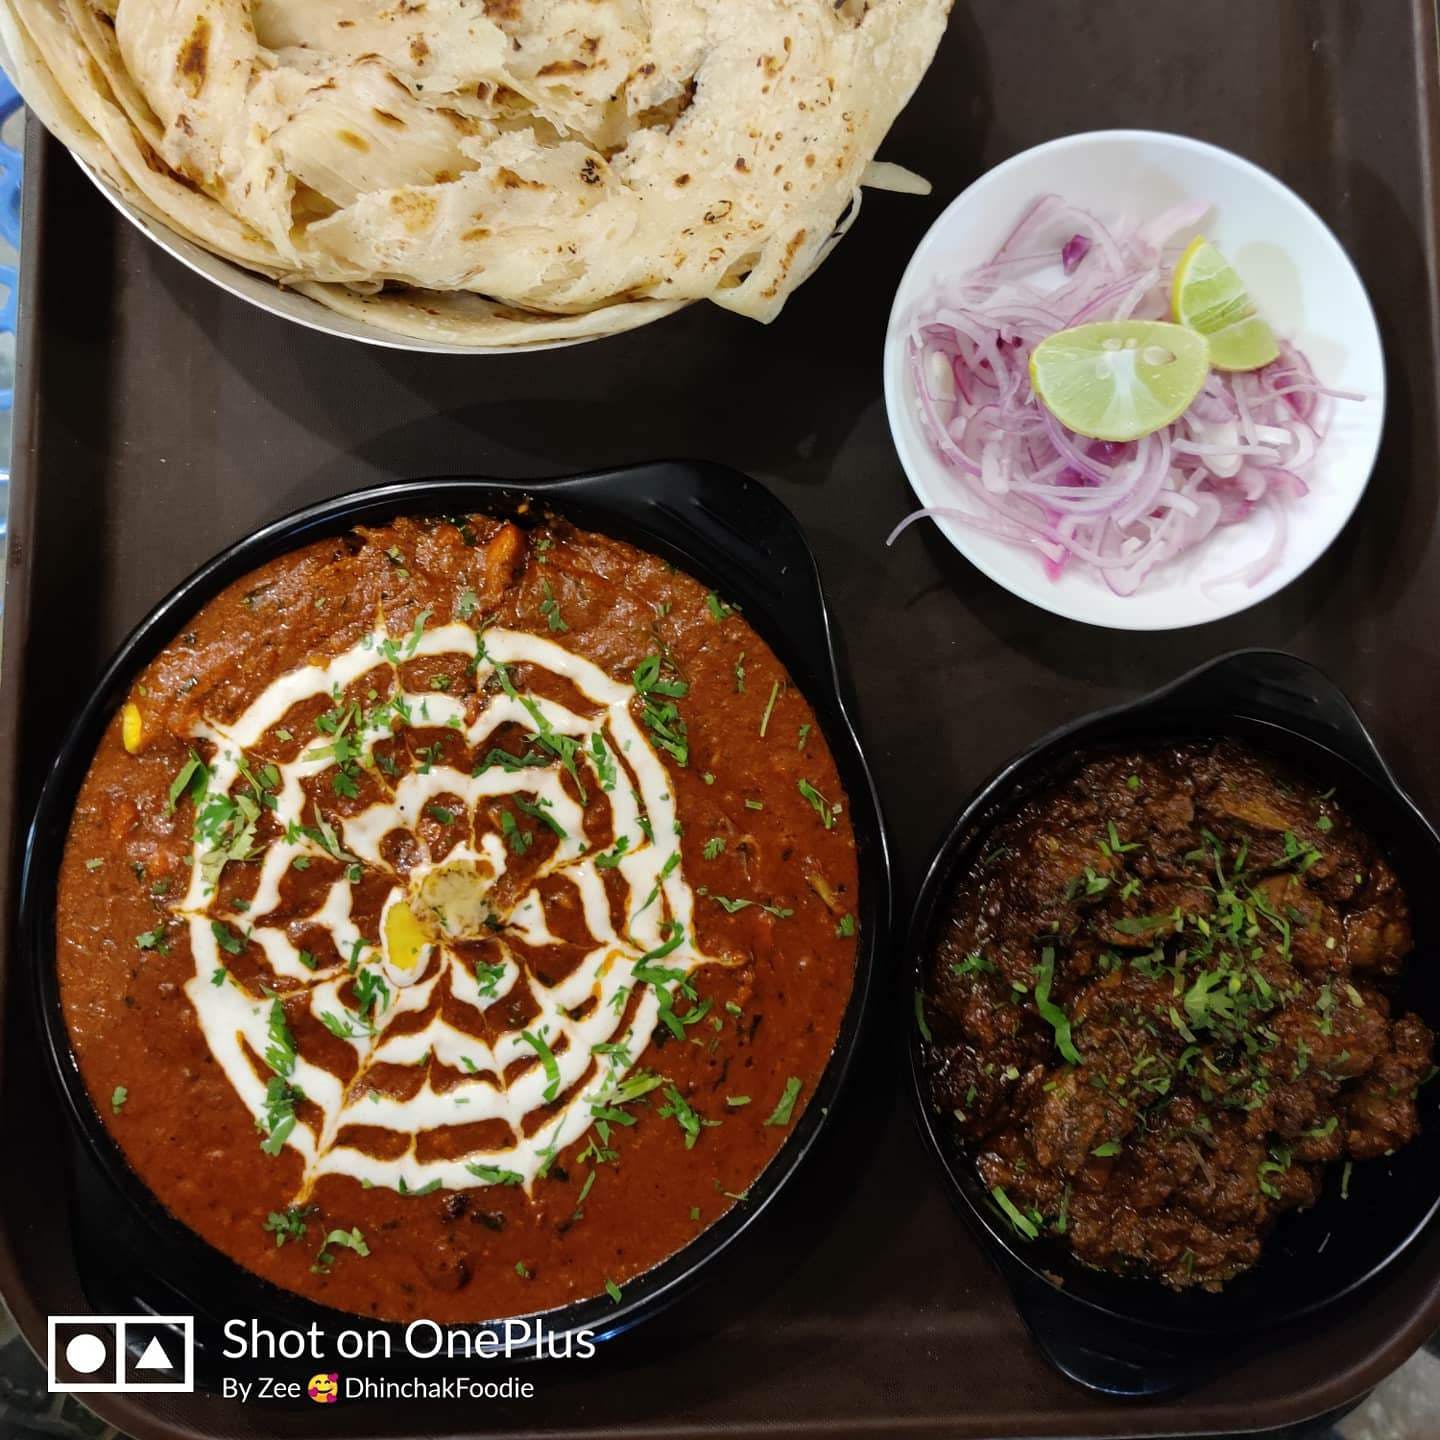 Dish,Food,Cuisine,Ingredient,Produce,Curry,Recipe,Indian cuisine,Dal makhani,Lunch